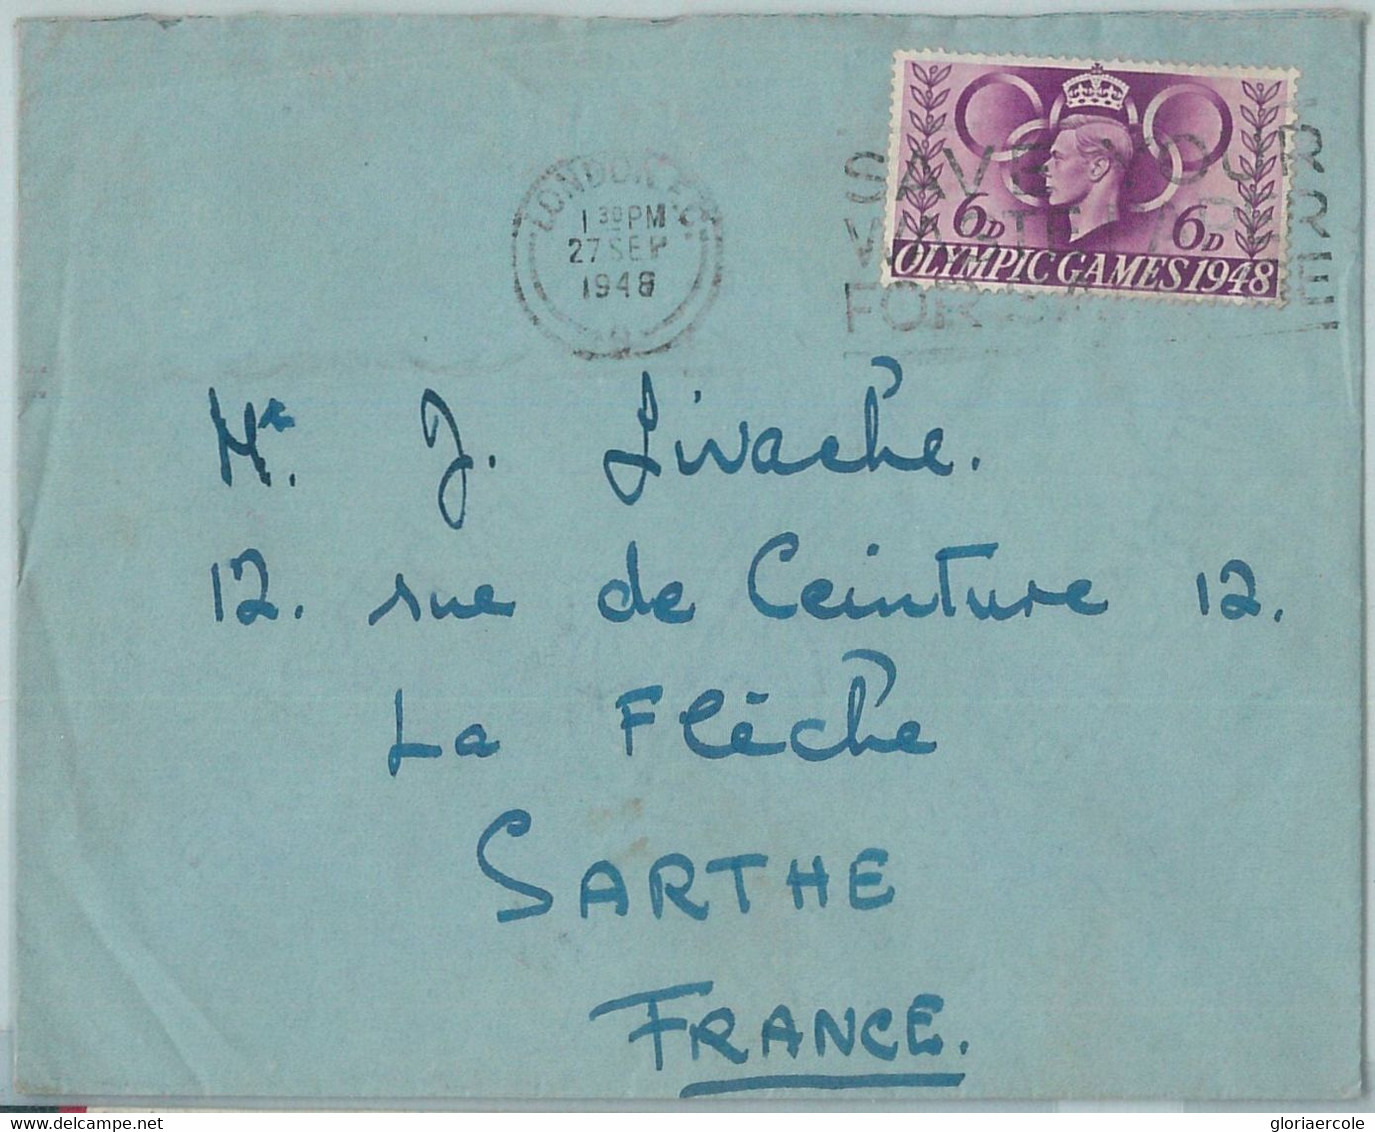 68019 - GB - POSTAL HISTORY -  COVER To FRANCE  1948  Olympic Games - Summer 1948: London